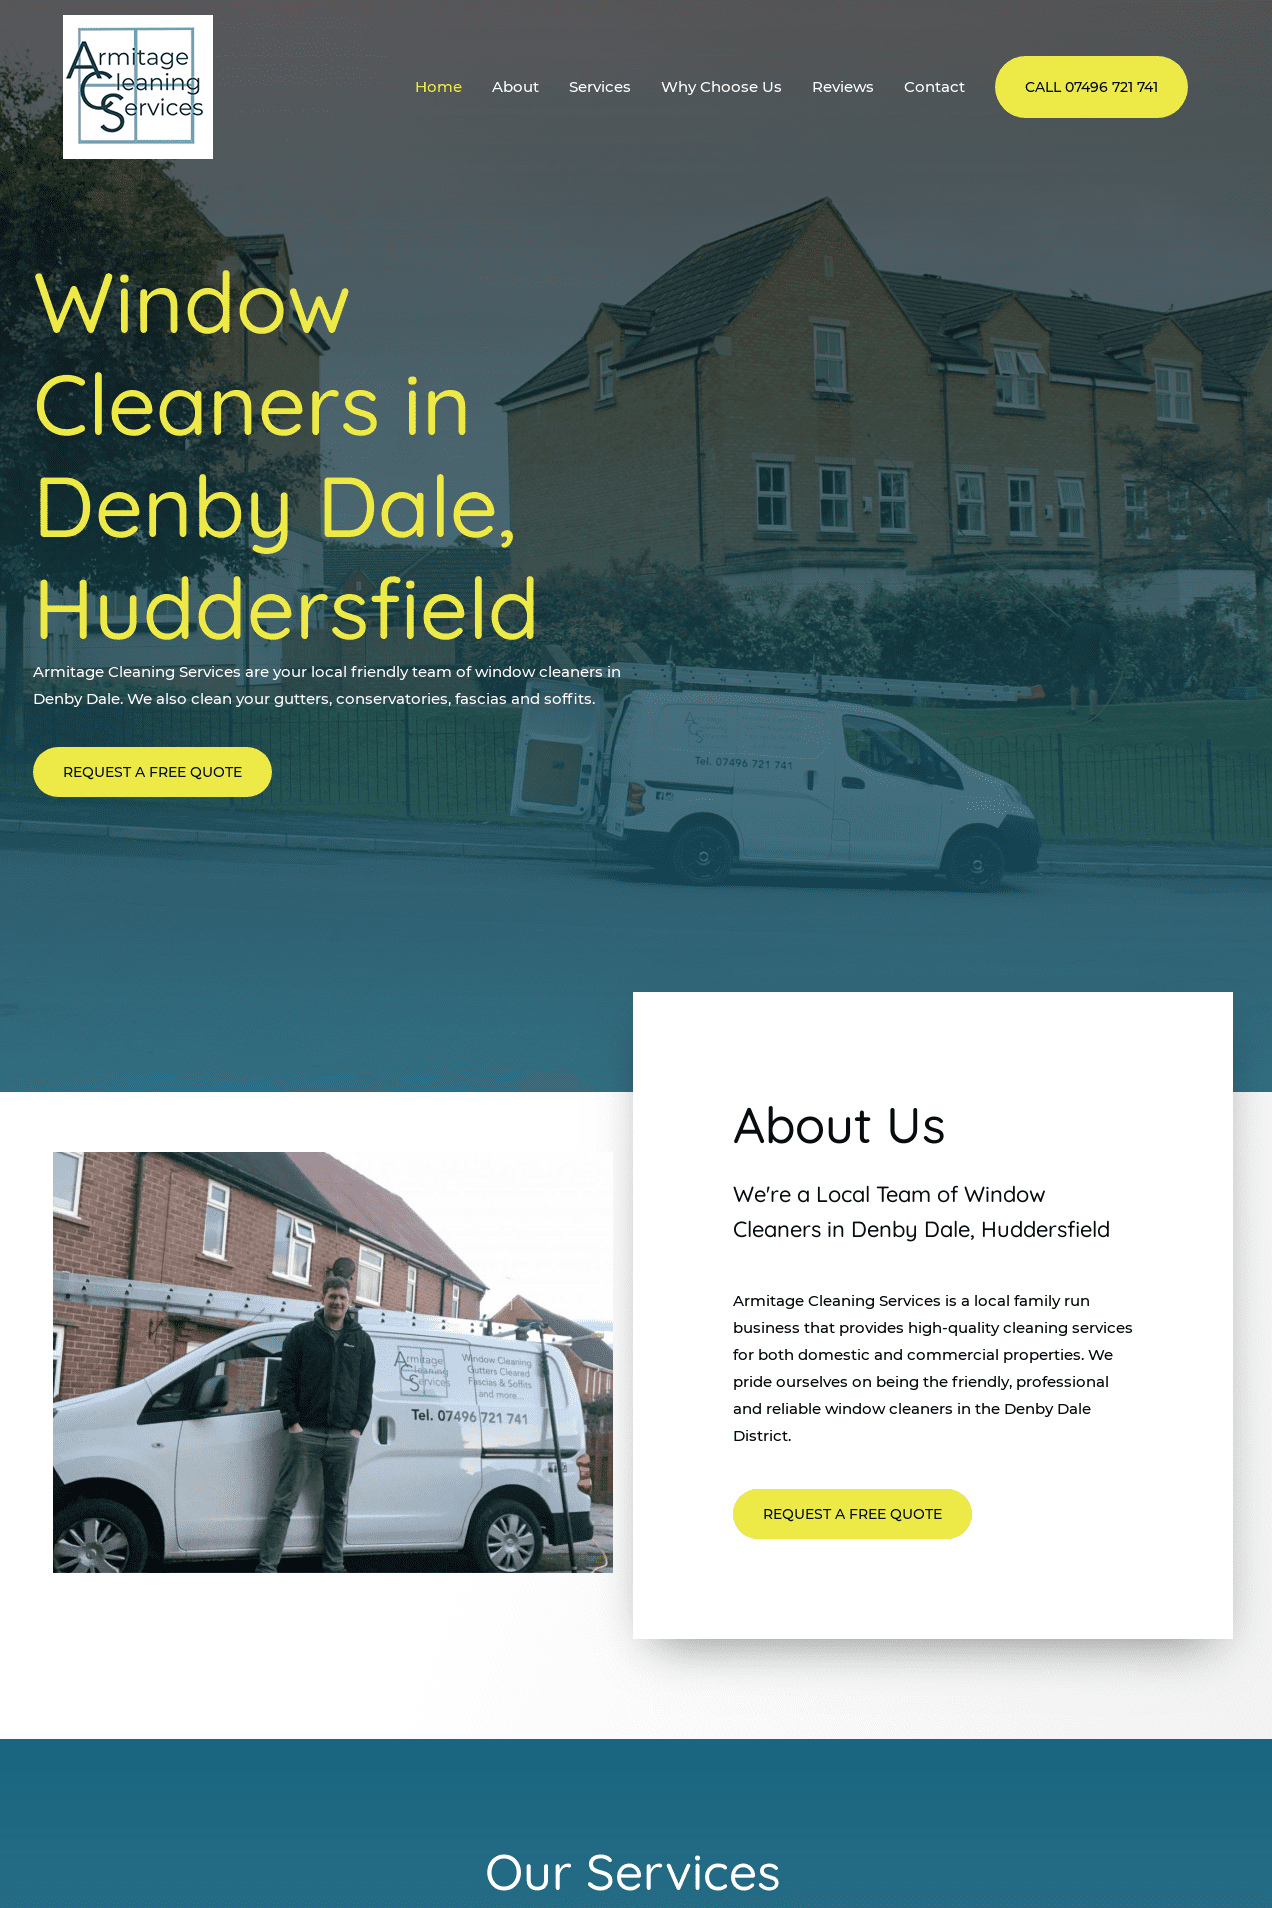 Armitage cleaning services website screenshot 3.2